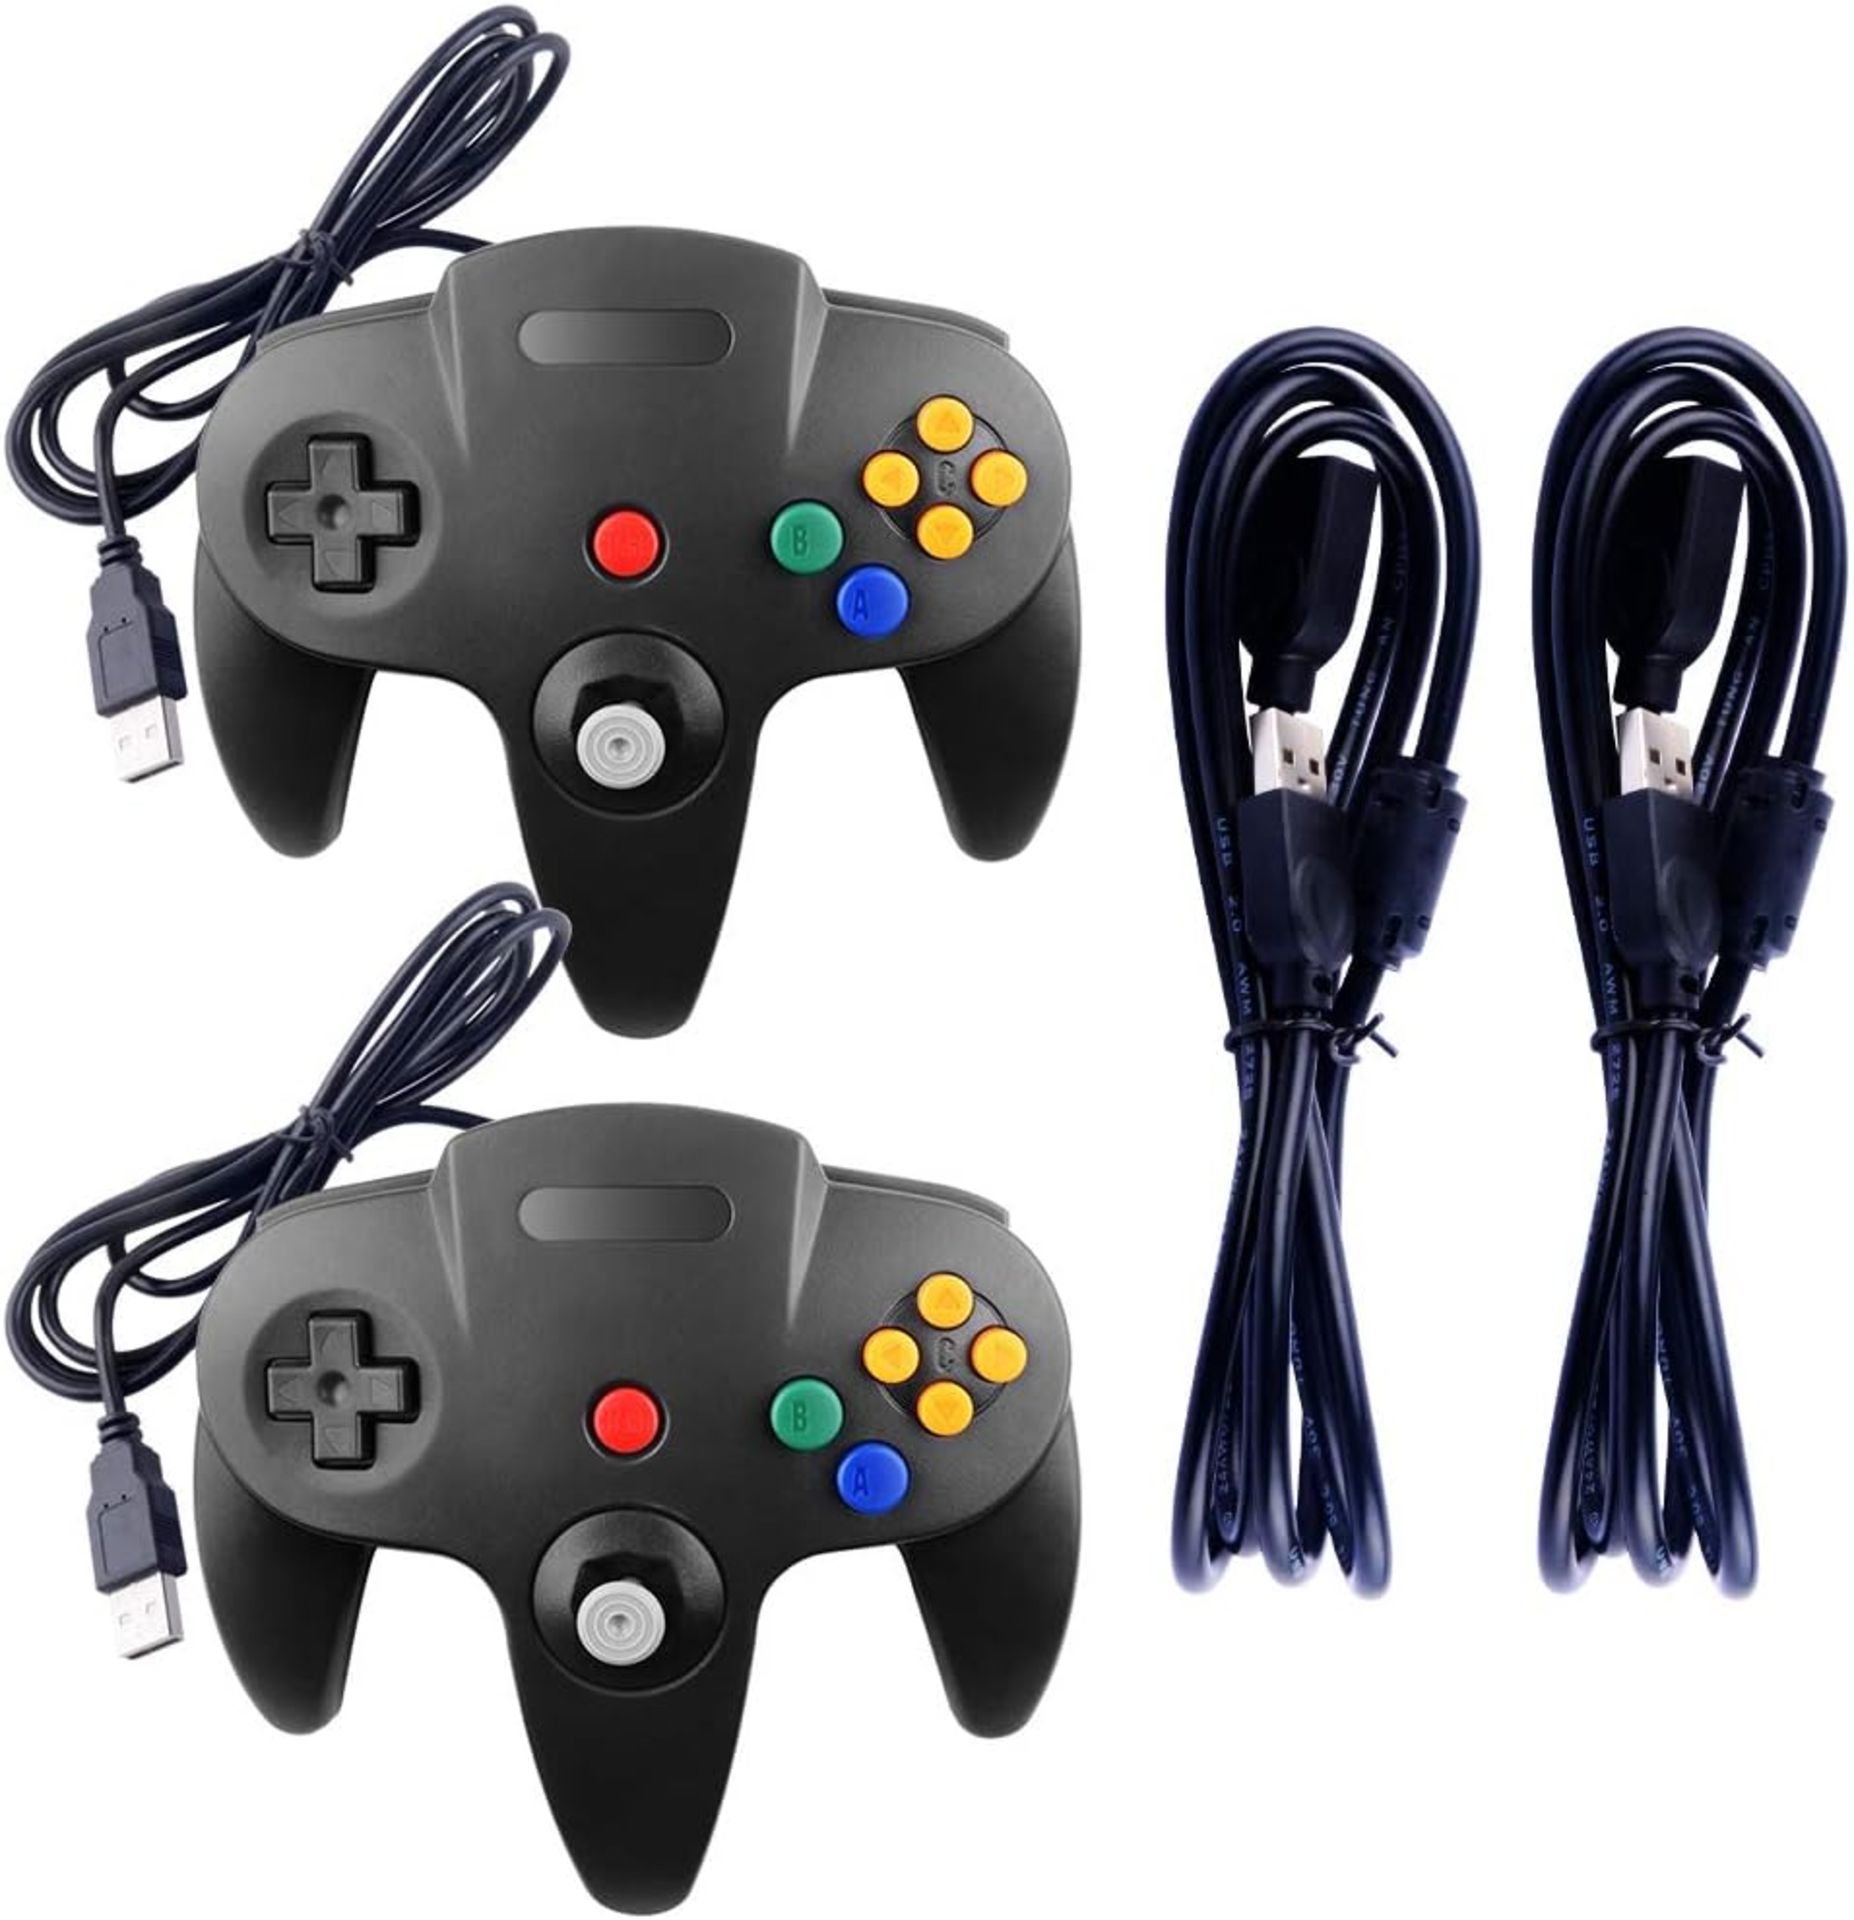 RRP £24.99 NewHail 2Pack Classic N64 USB Controller, Retro N64 Bit Gamepad USB Wired PC Controller